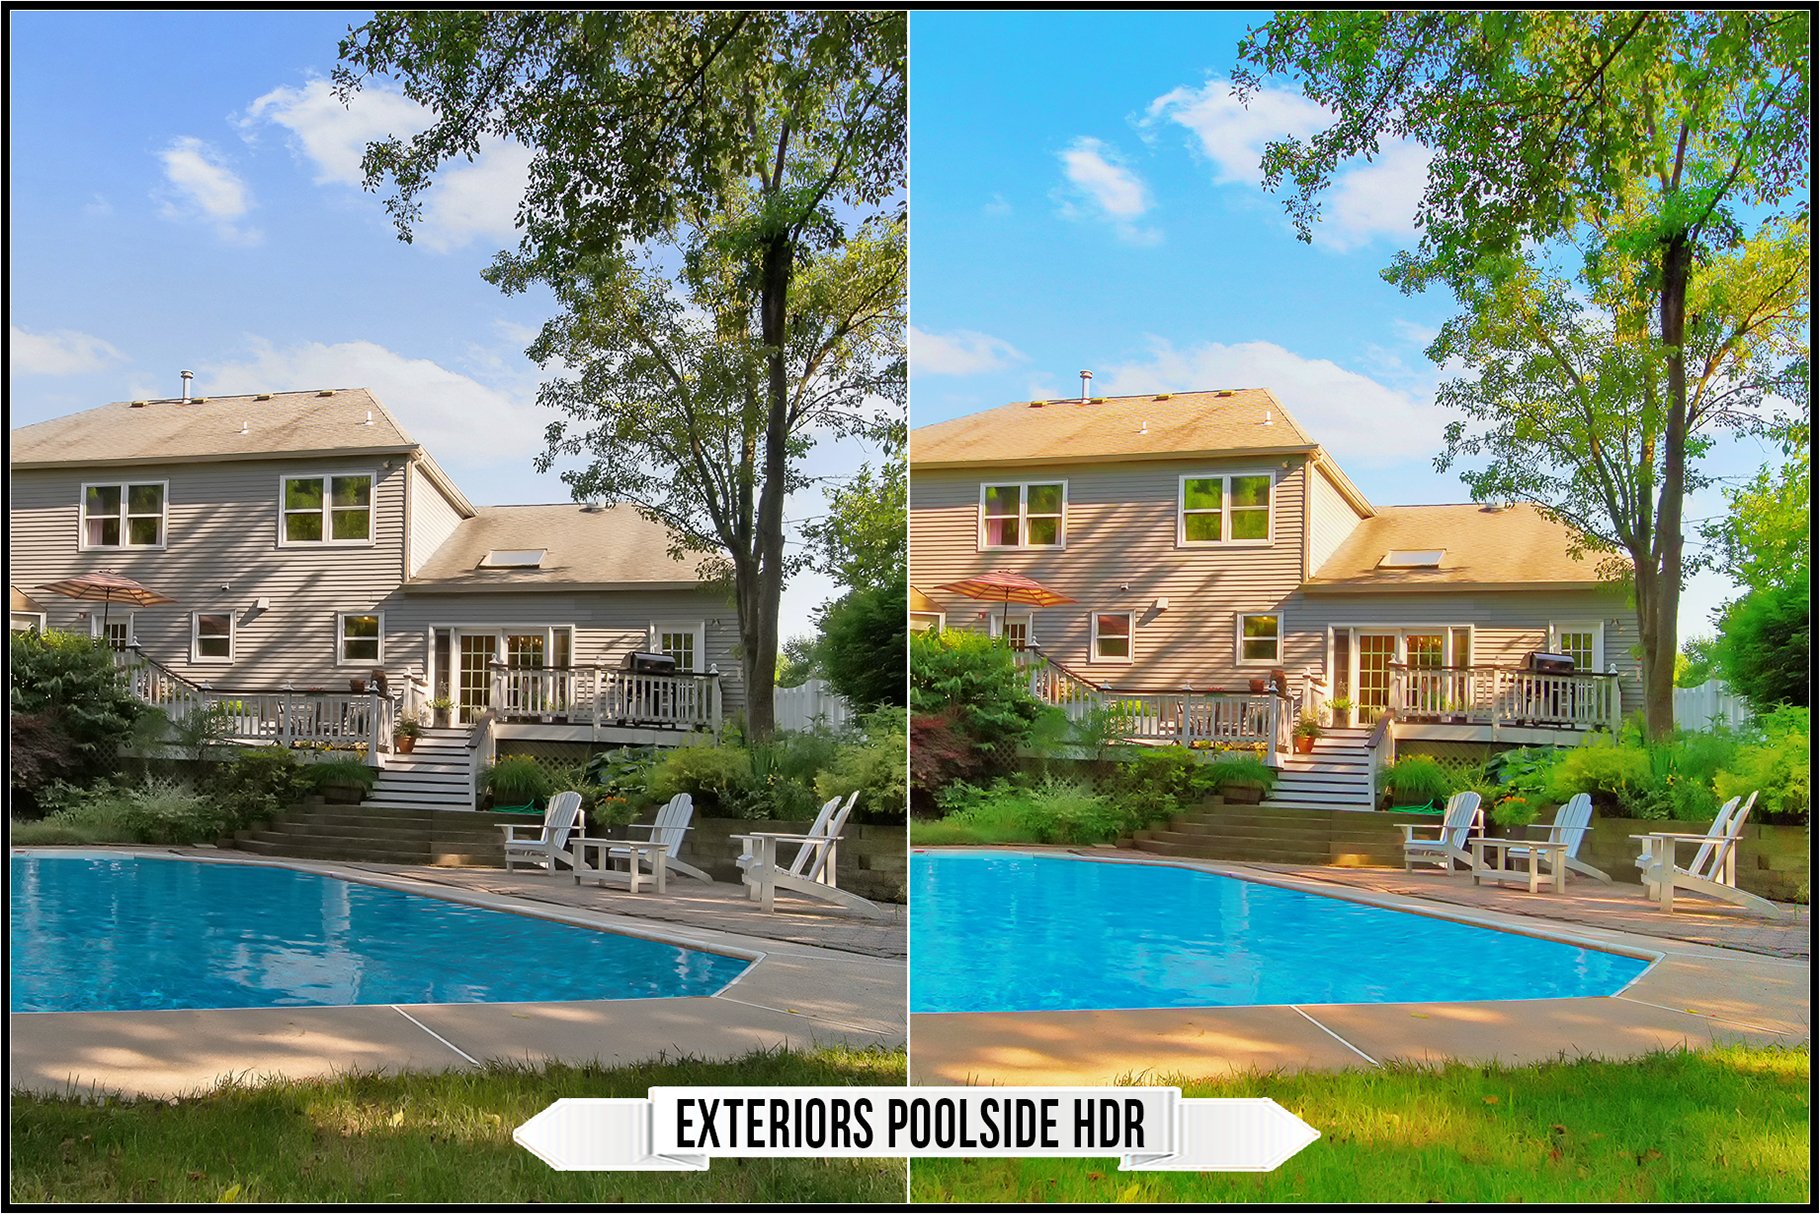 exteriors poolside hdr 609